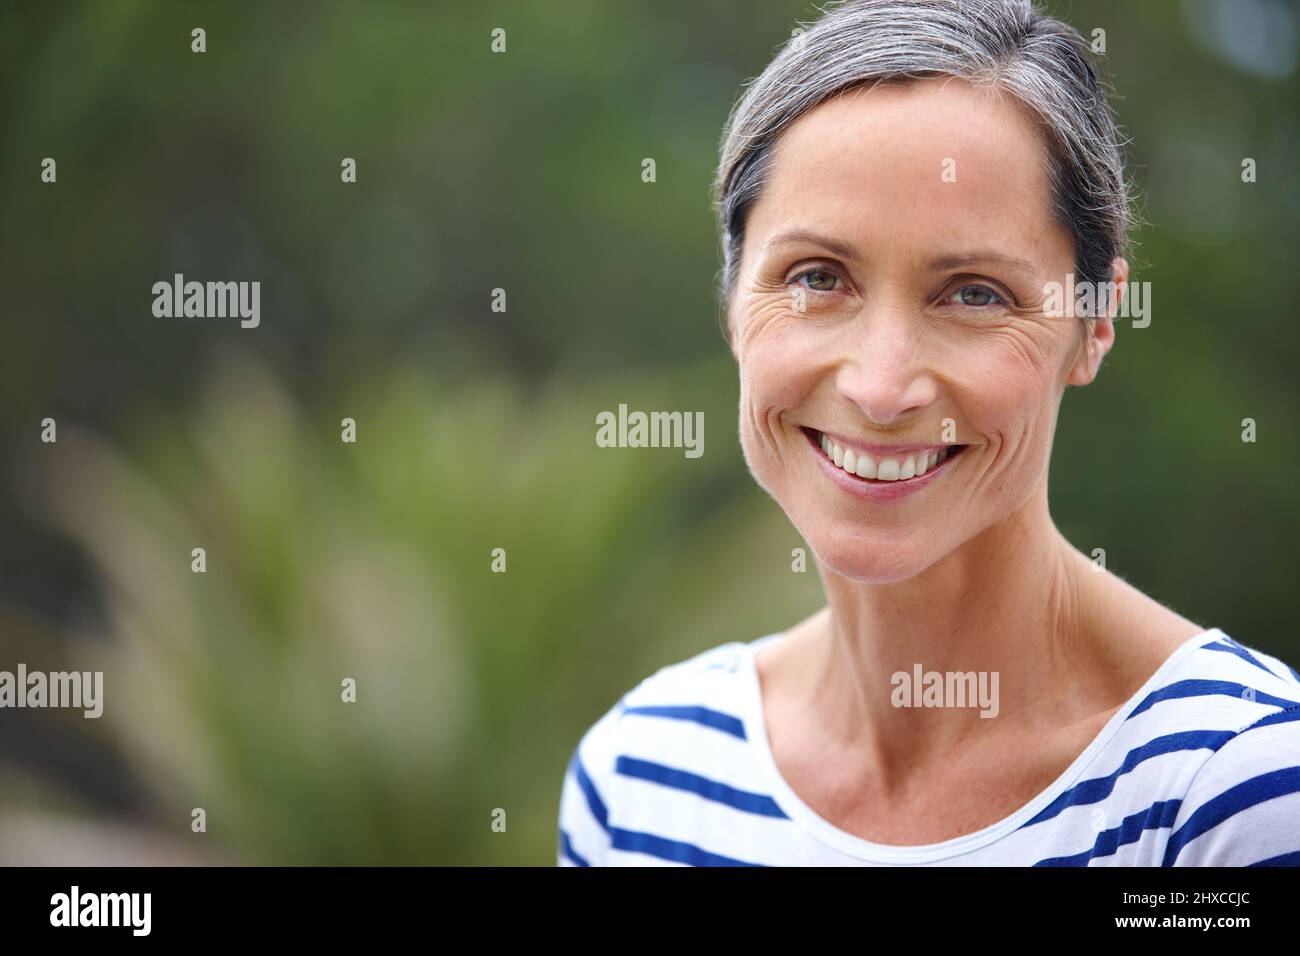 Content with her life. Cropped portrait of an attractive mature woman in casualwear standing outdoors. Stock Photo